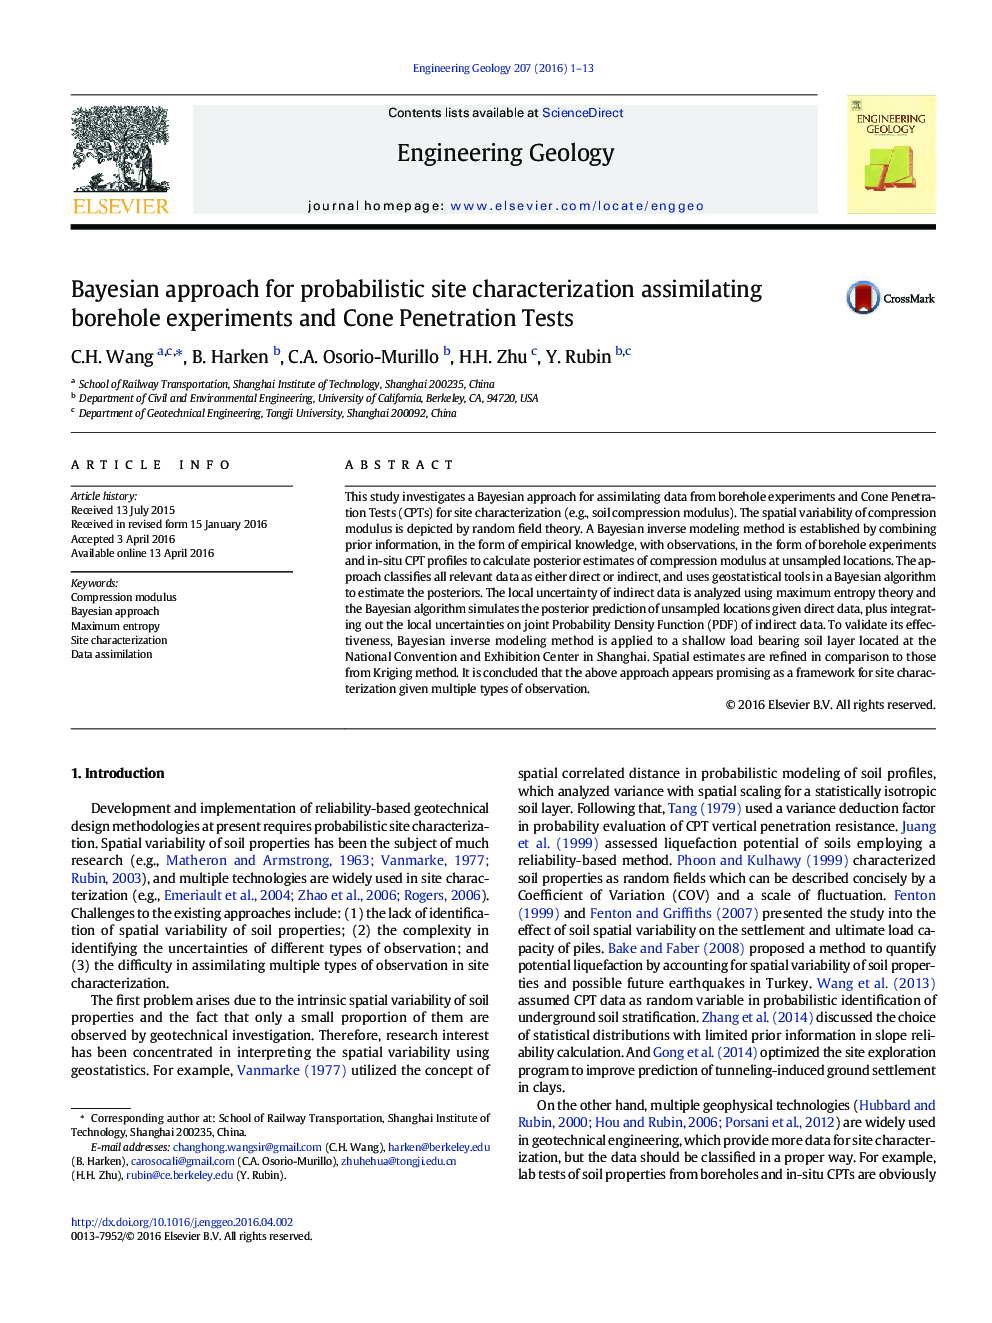 Bayesian approach for probabilistic site characterization assimilating borehole experiments and Cone Penetration Tests